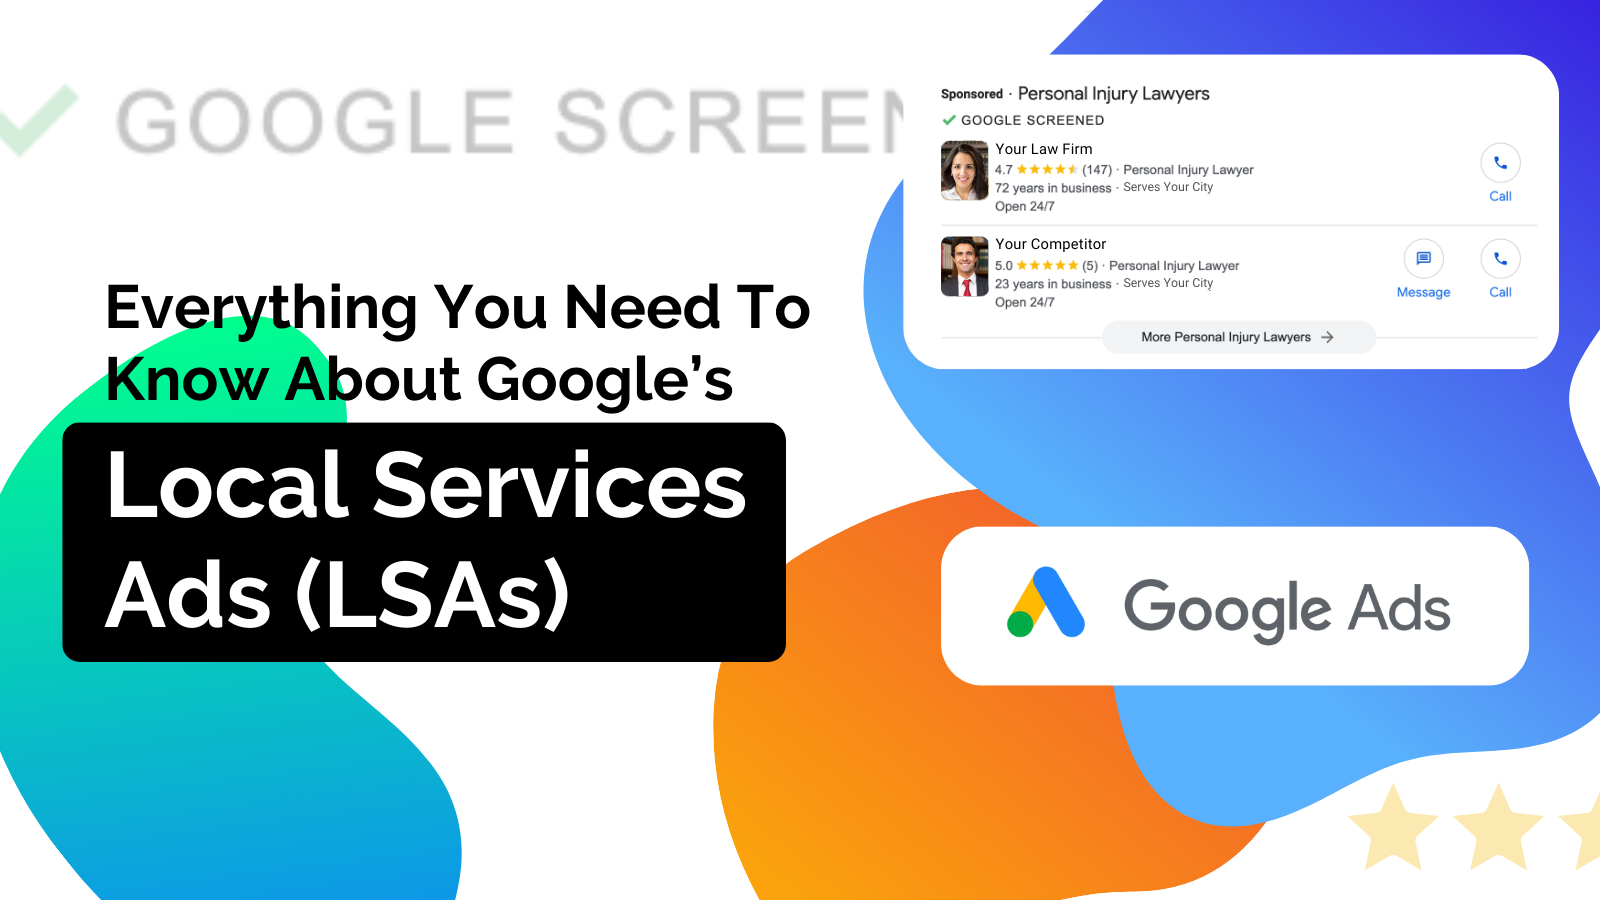 Everything You Need To Know About Google’s Local Services Ads (LSAs)